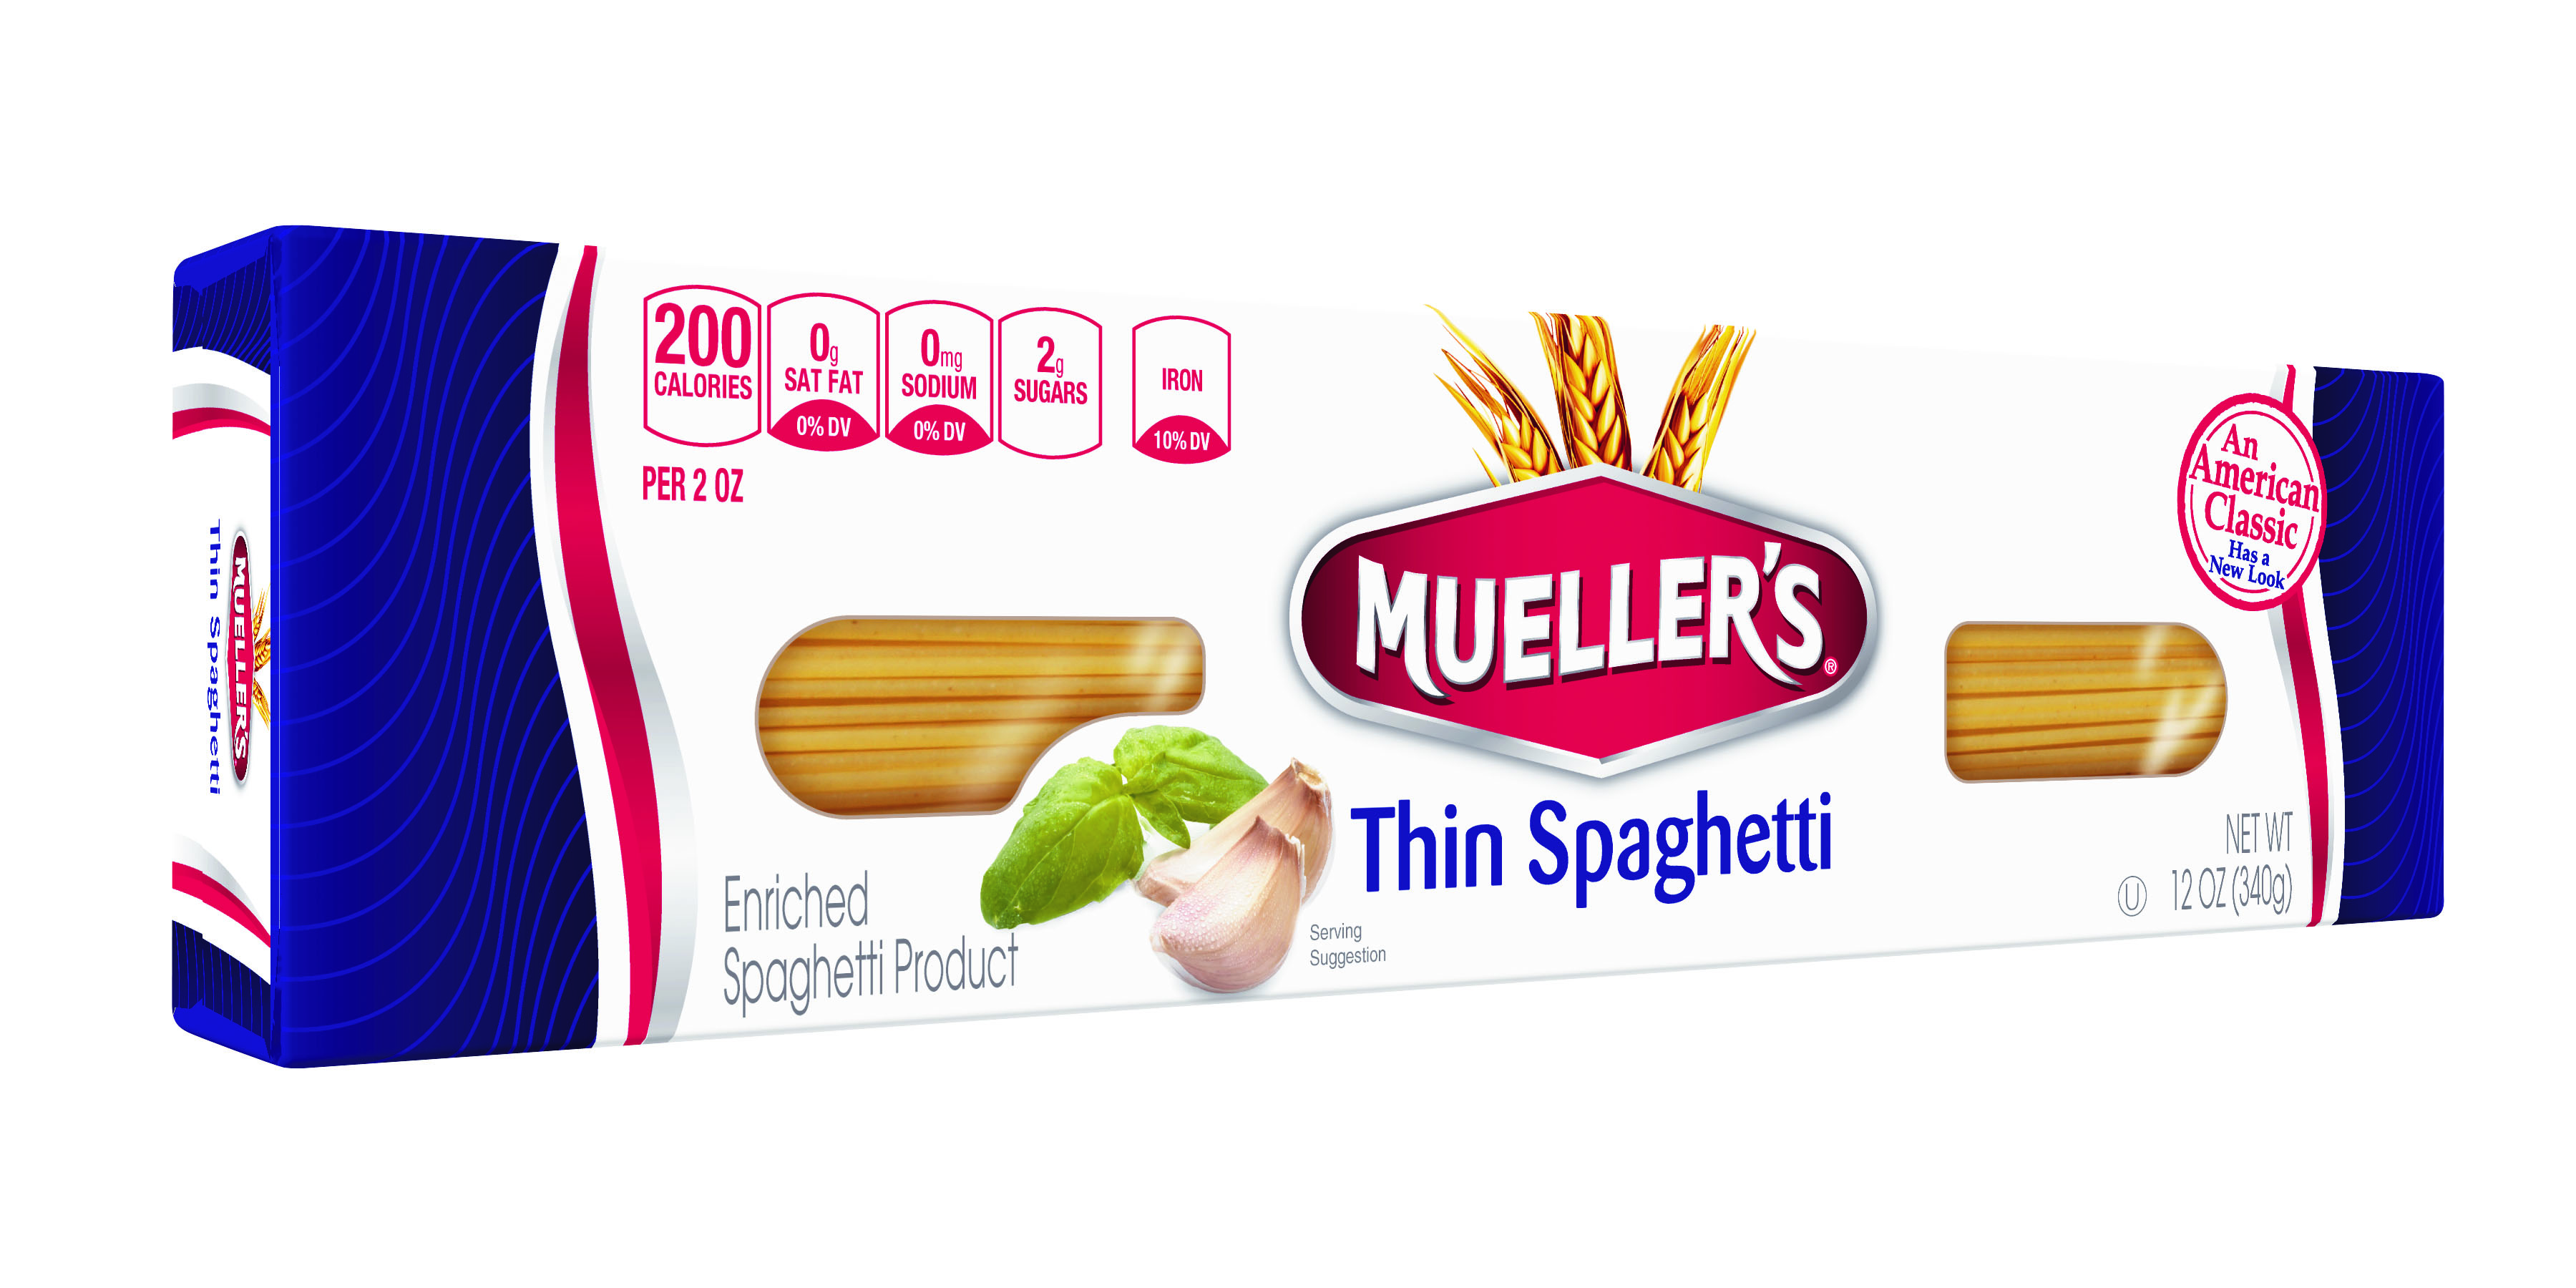 box of thin spaghetti noodles from muellers pasta